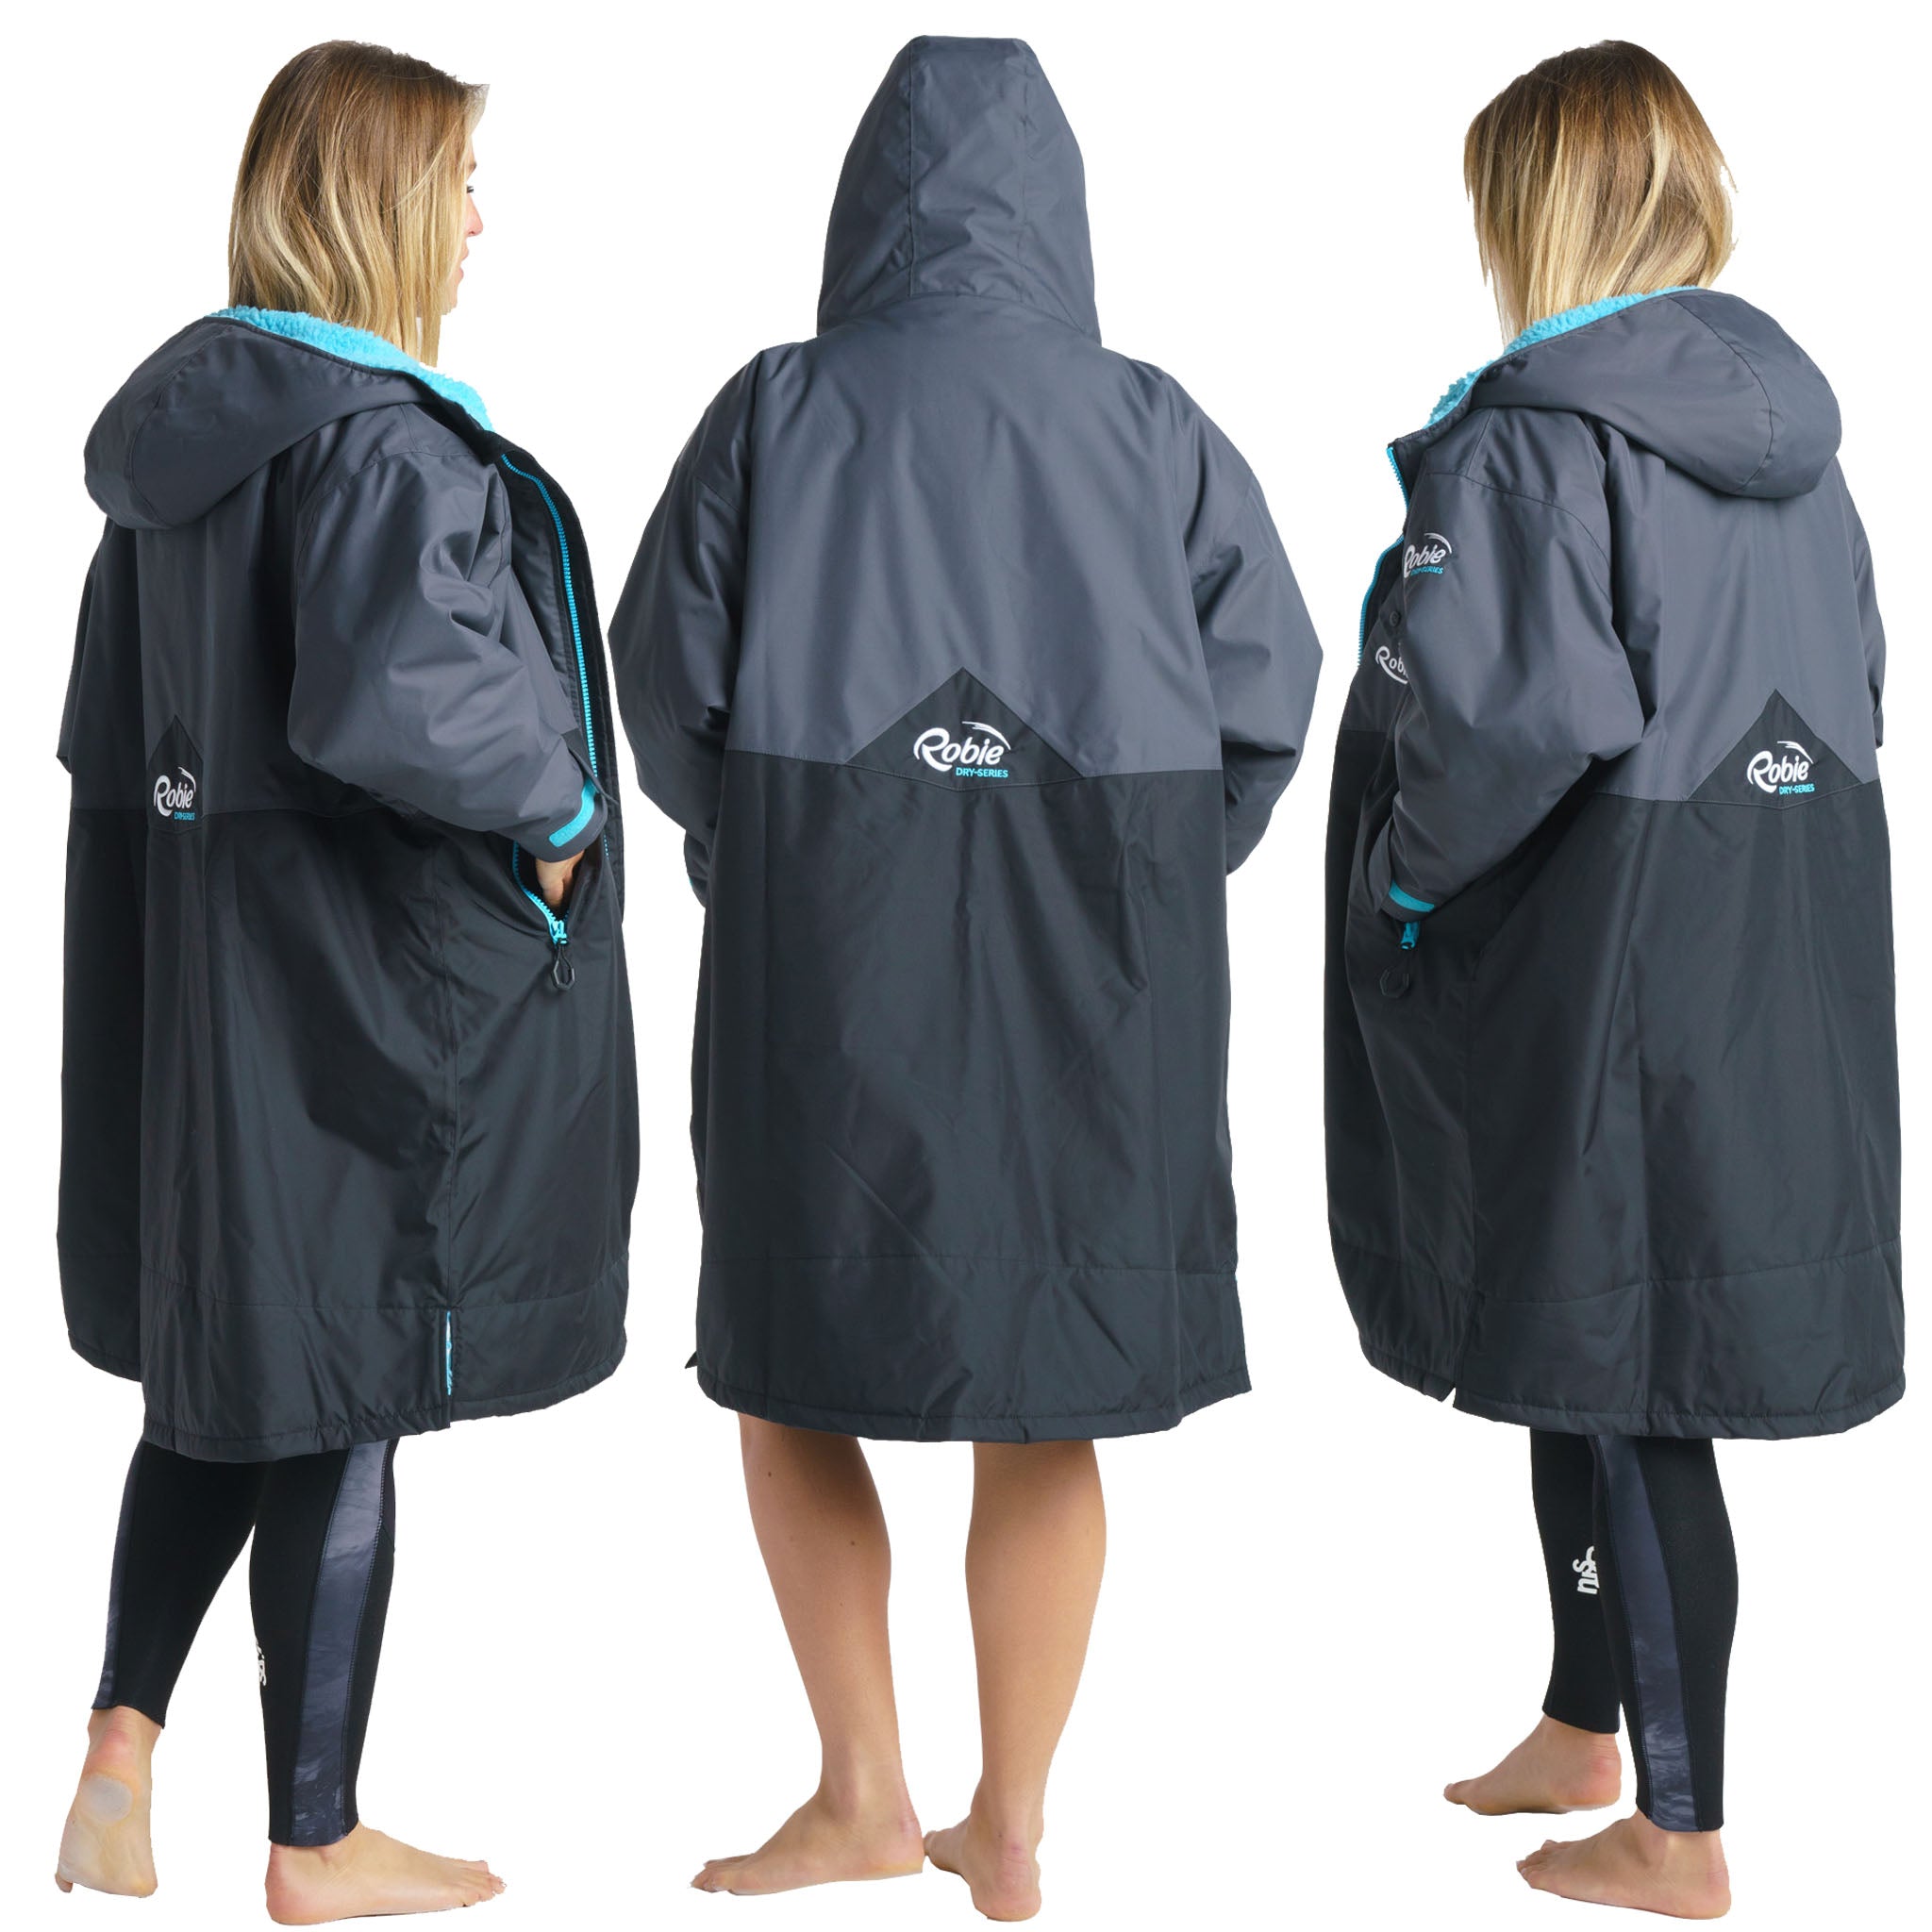 Robie Dry-Series Eco Long Sleeve Hooded Changing Robe Unisex Black/Charcoal - Back & Sides